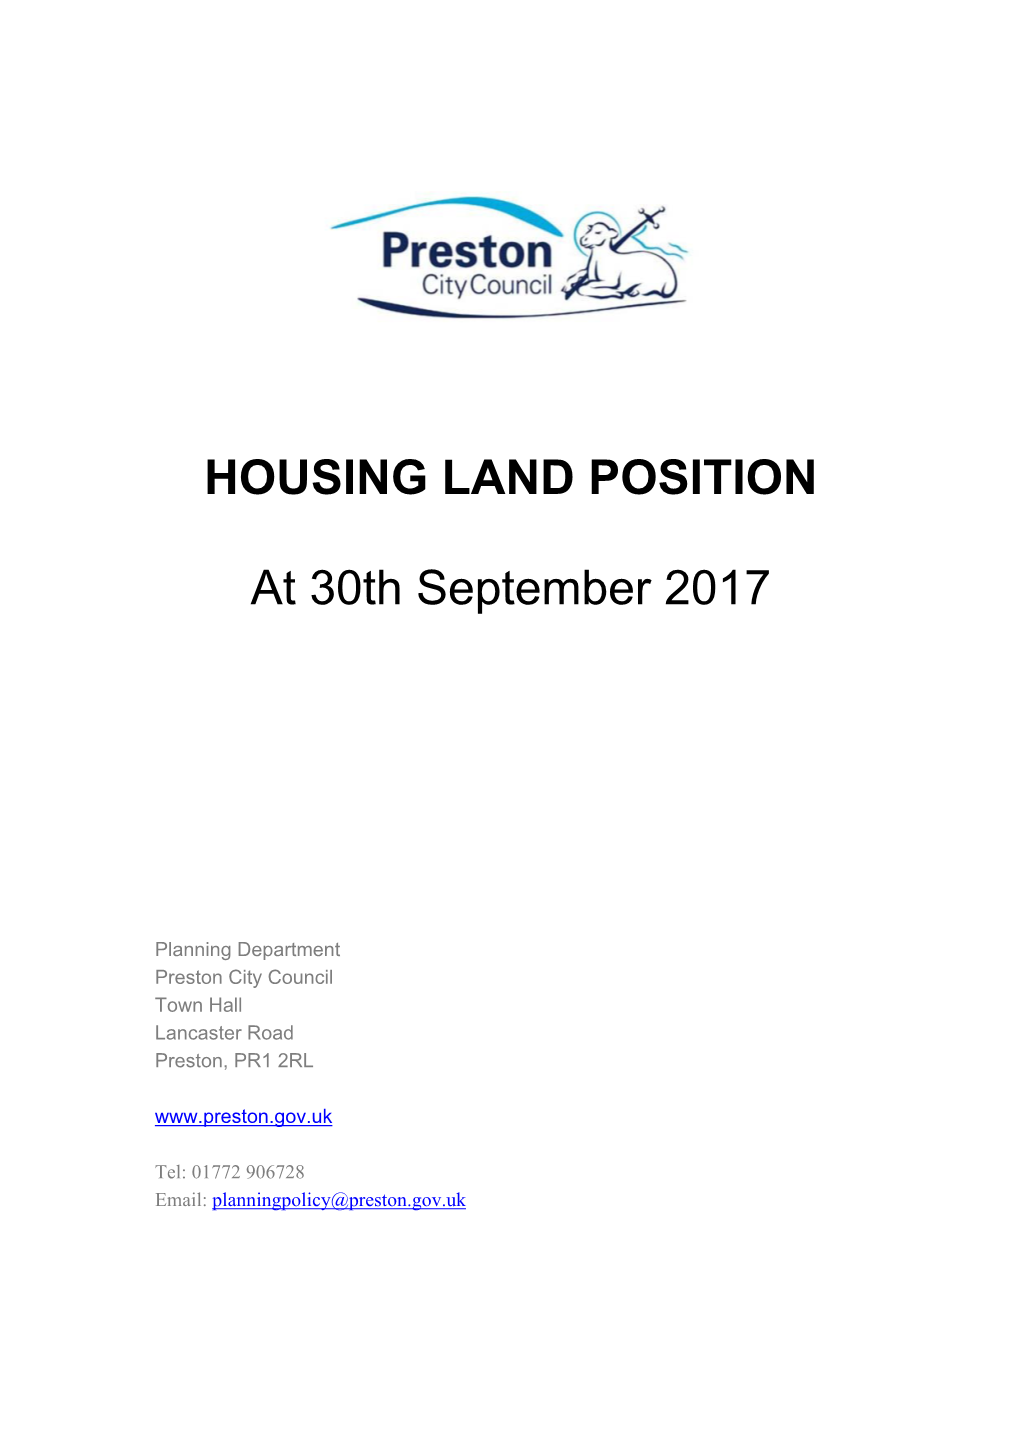 Housing Land Position at October 2017